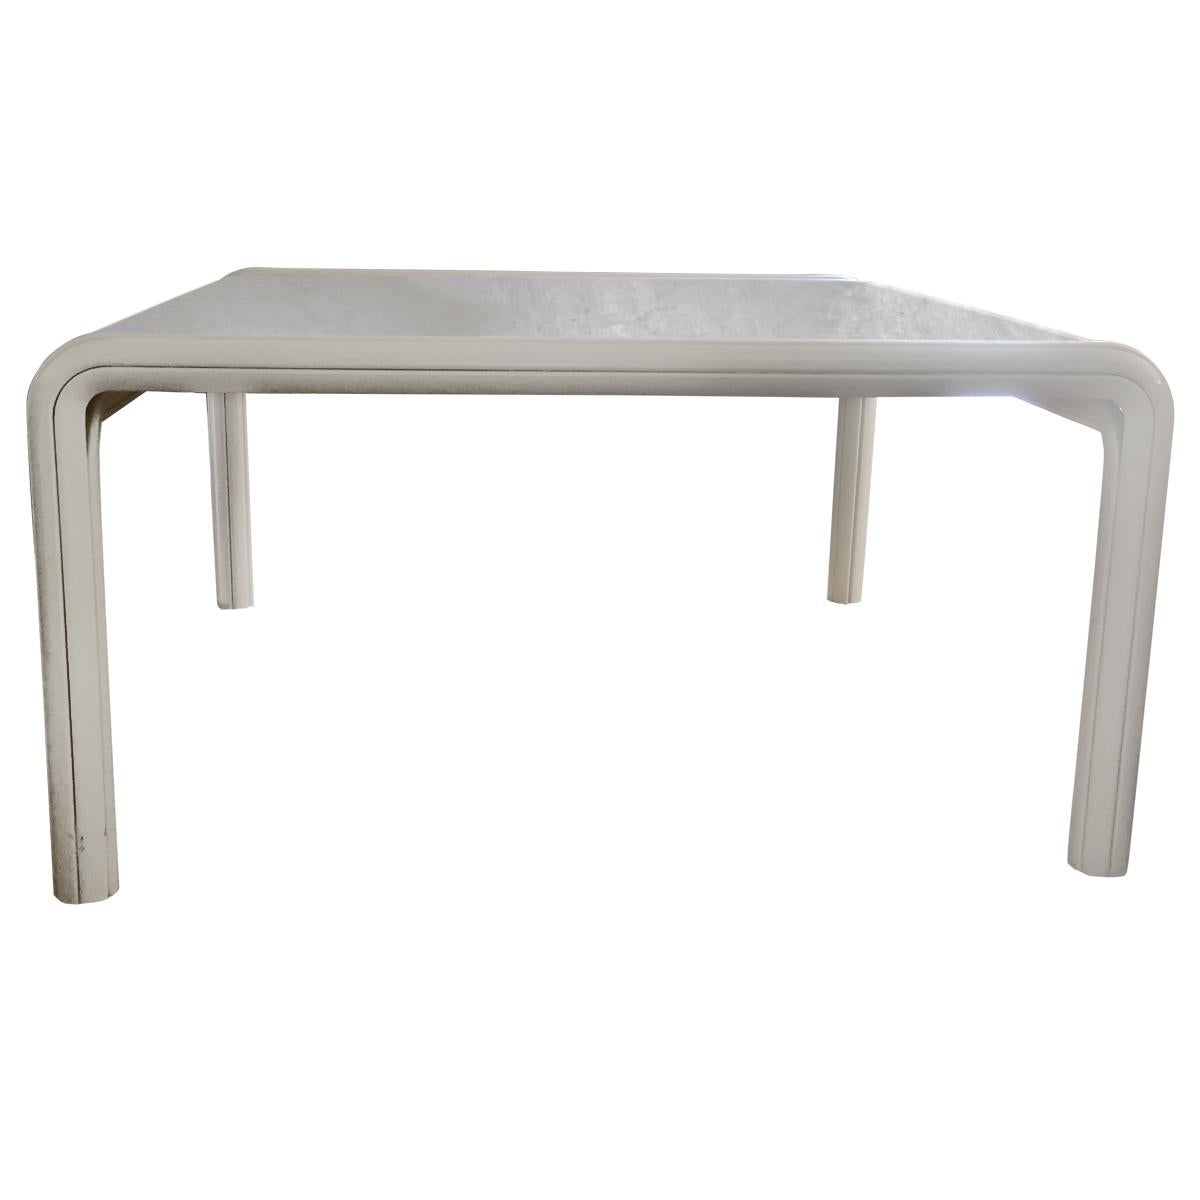 Monumental and very heavy square dining table Orsay designed by Gae Aulenti for Knoll International.
This table has an off-white lacquered aluminium frame and a white/grey marble top.
It can seat up to 8 persons with its royal dimensions of 145 x